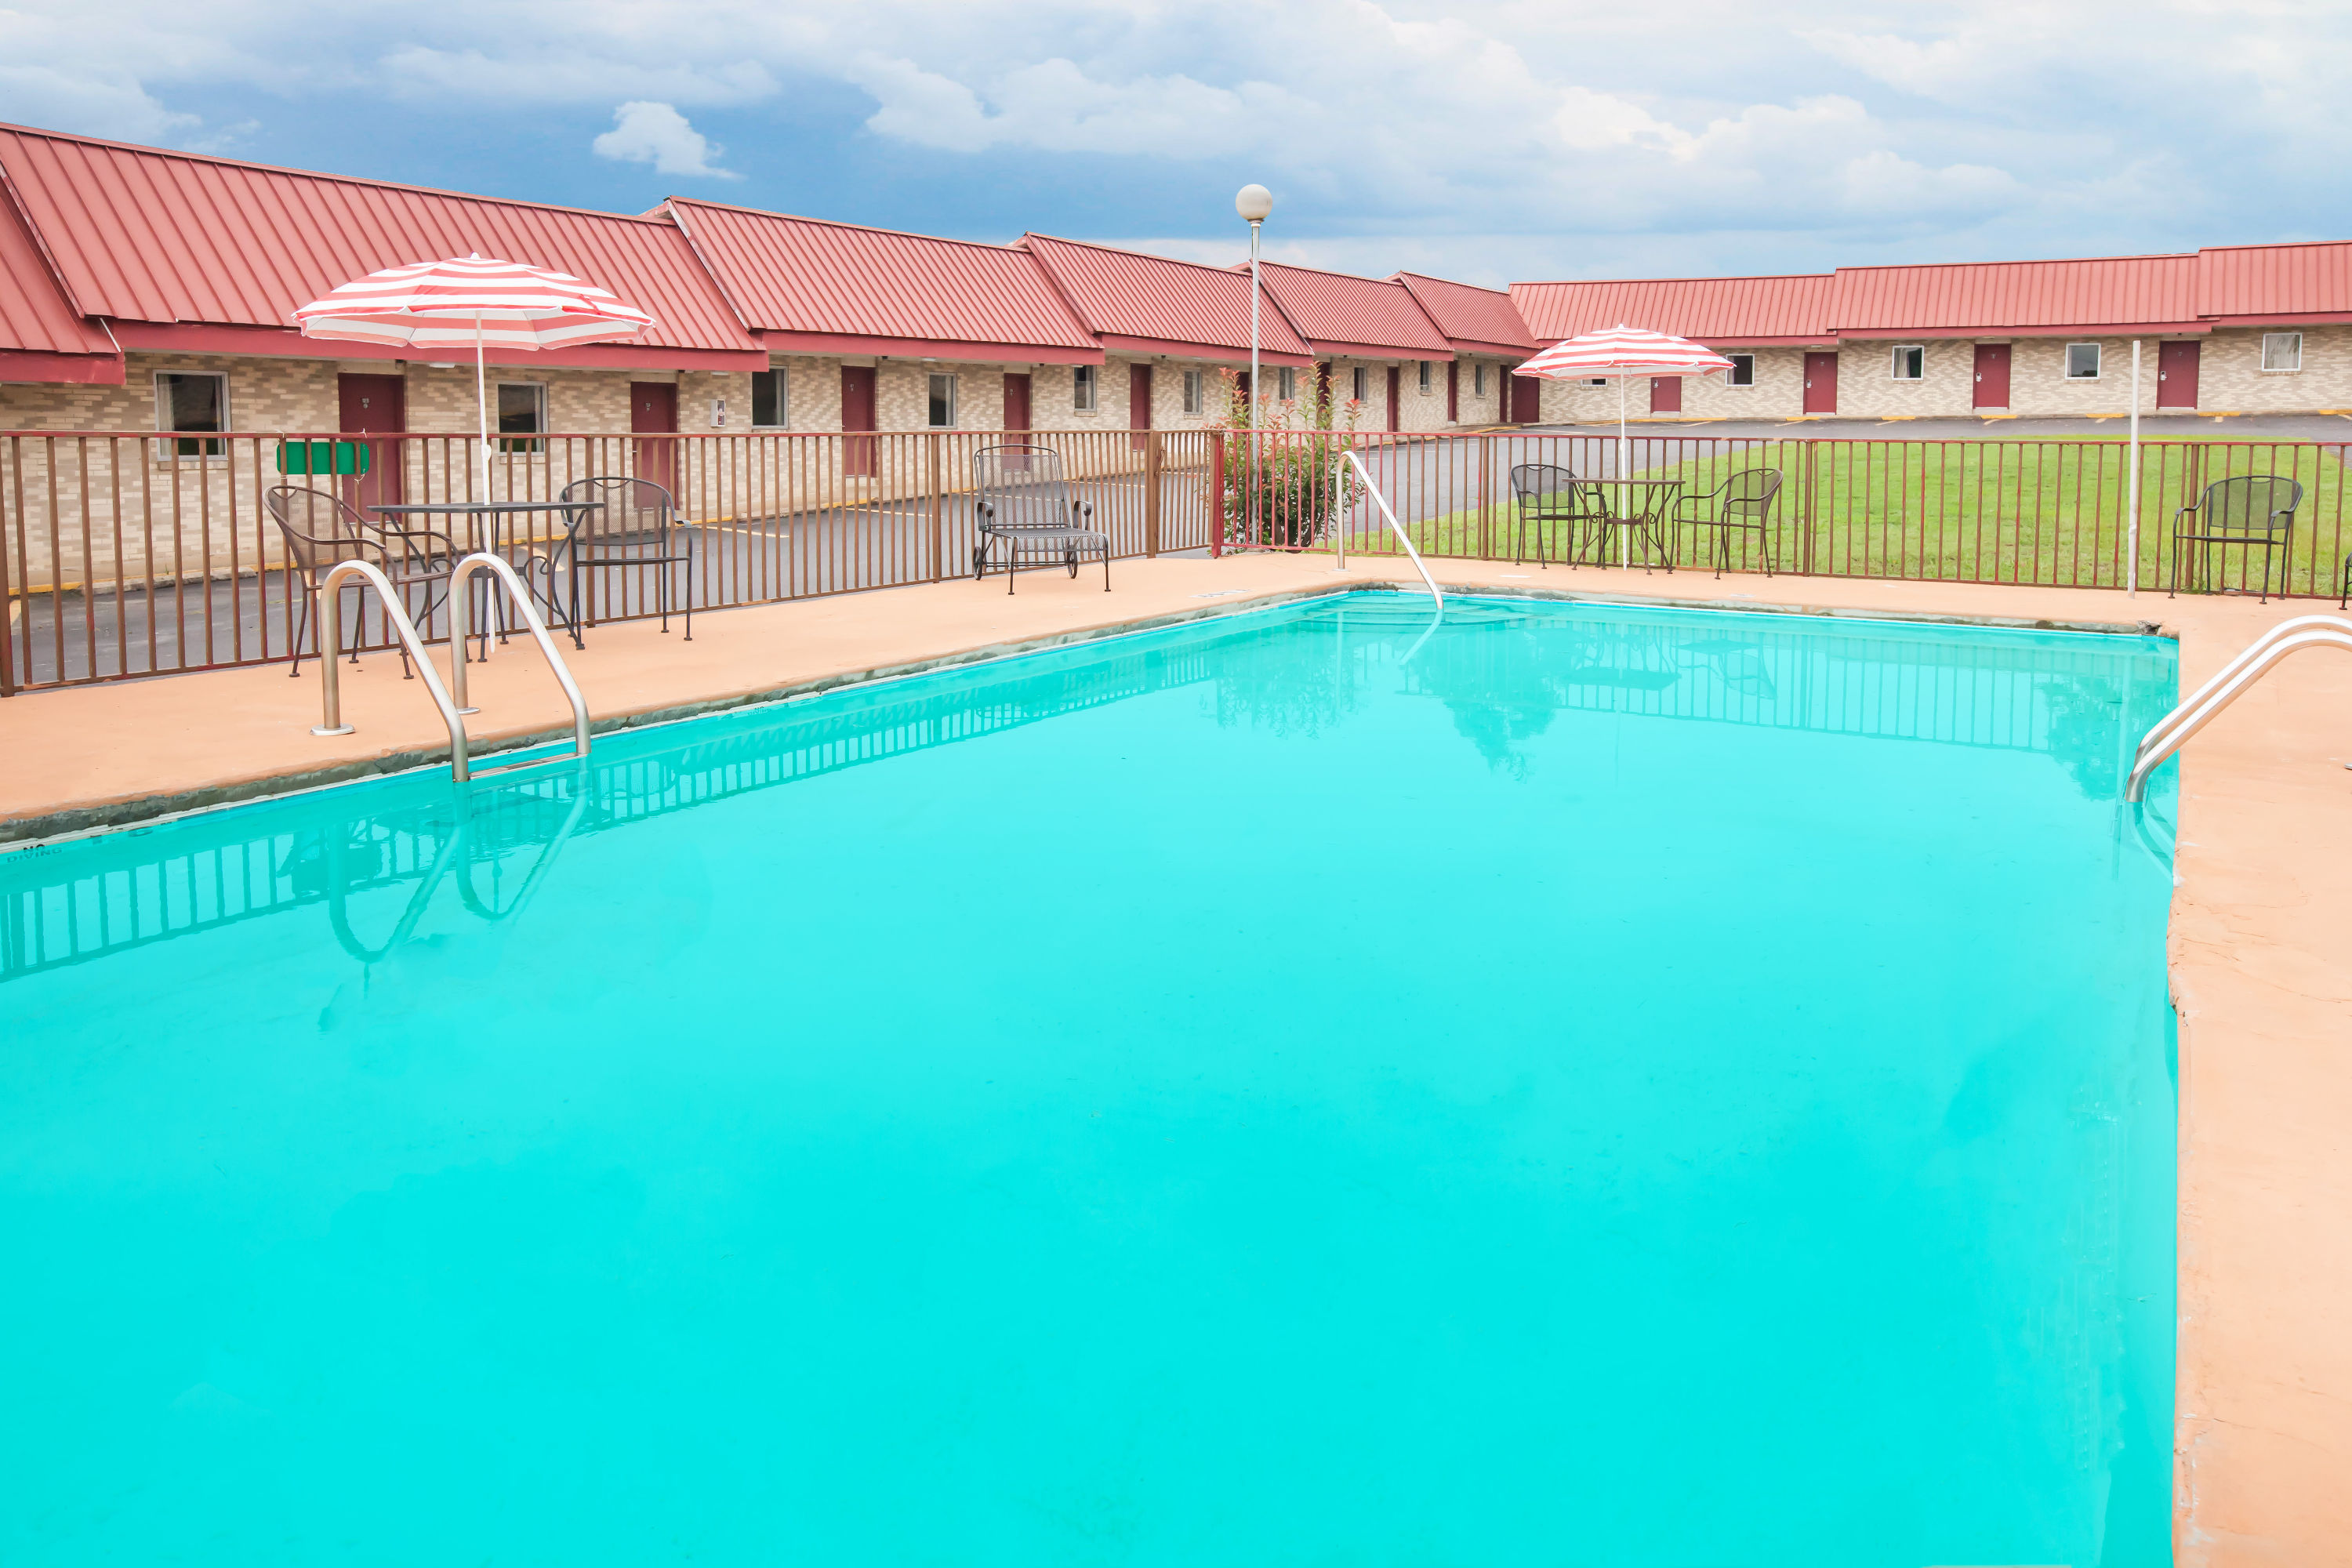 Days Inn by Wyndham Mountain View Mountain View, AR Hotels